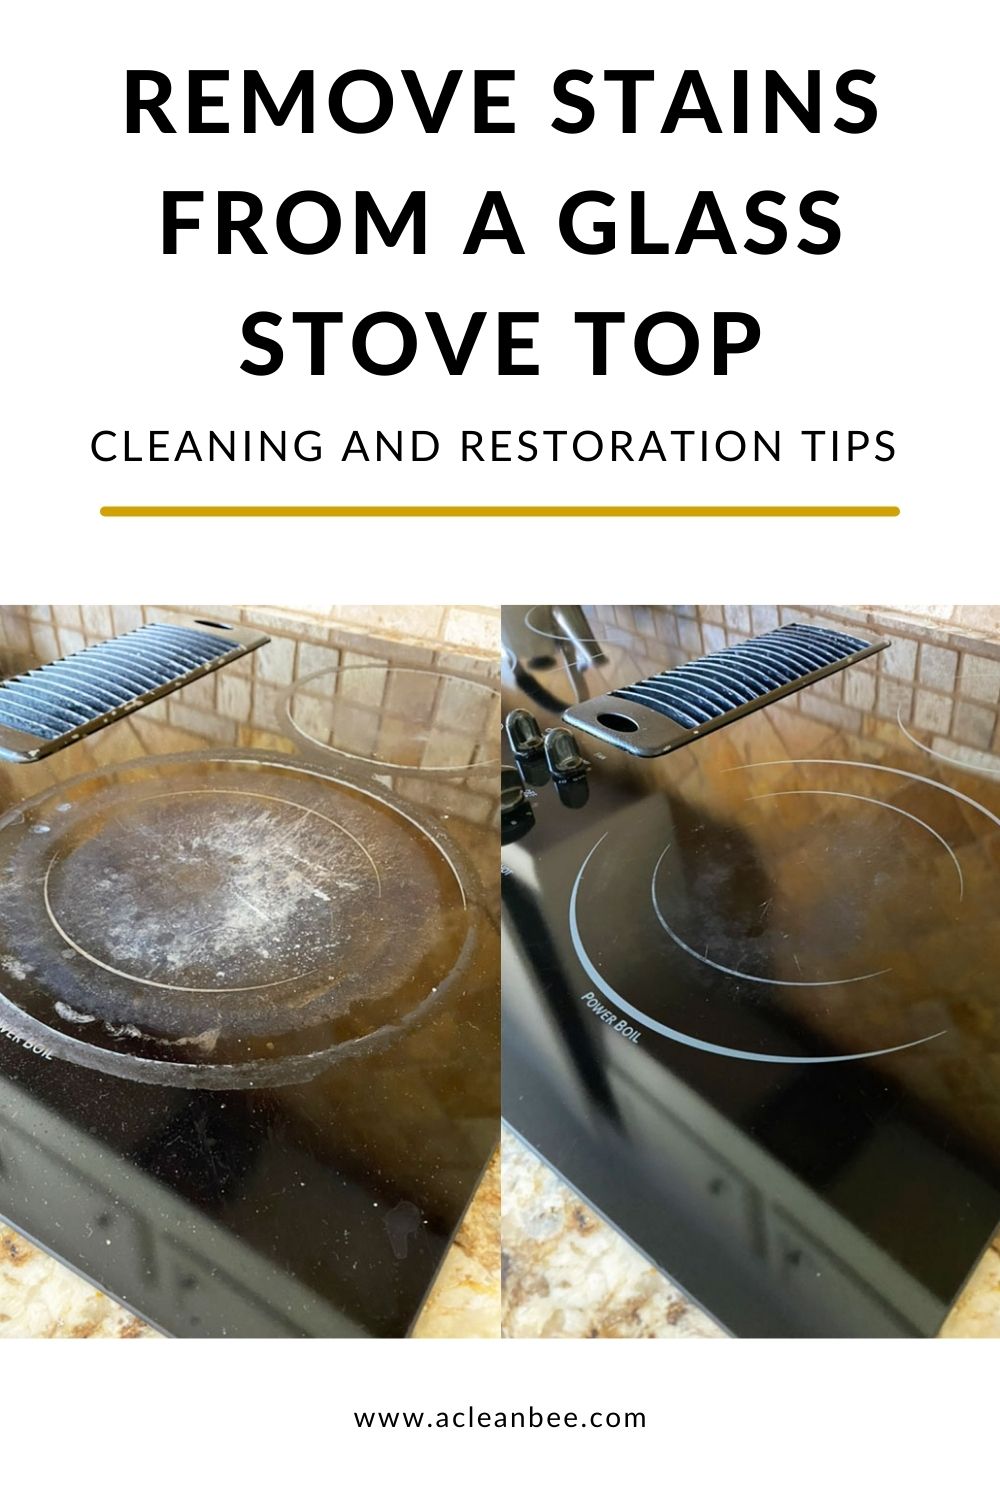 How to Burn from a Glass Stove Top